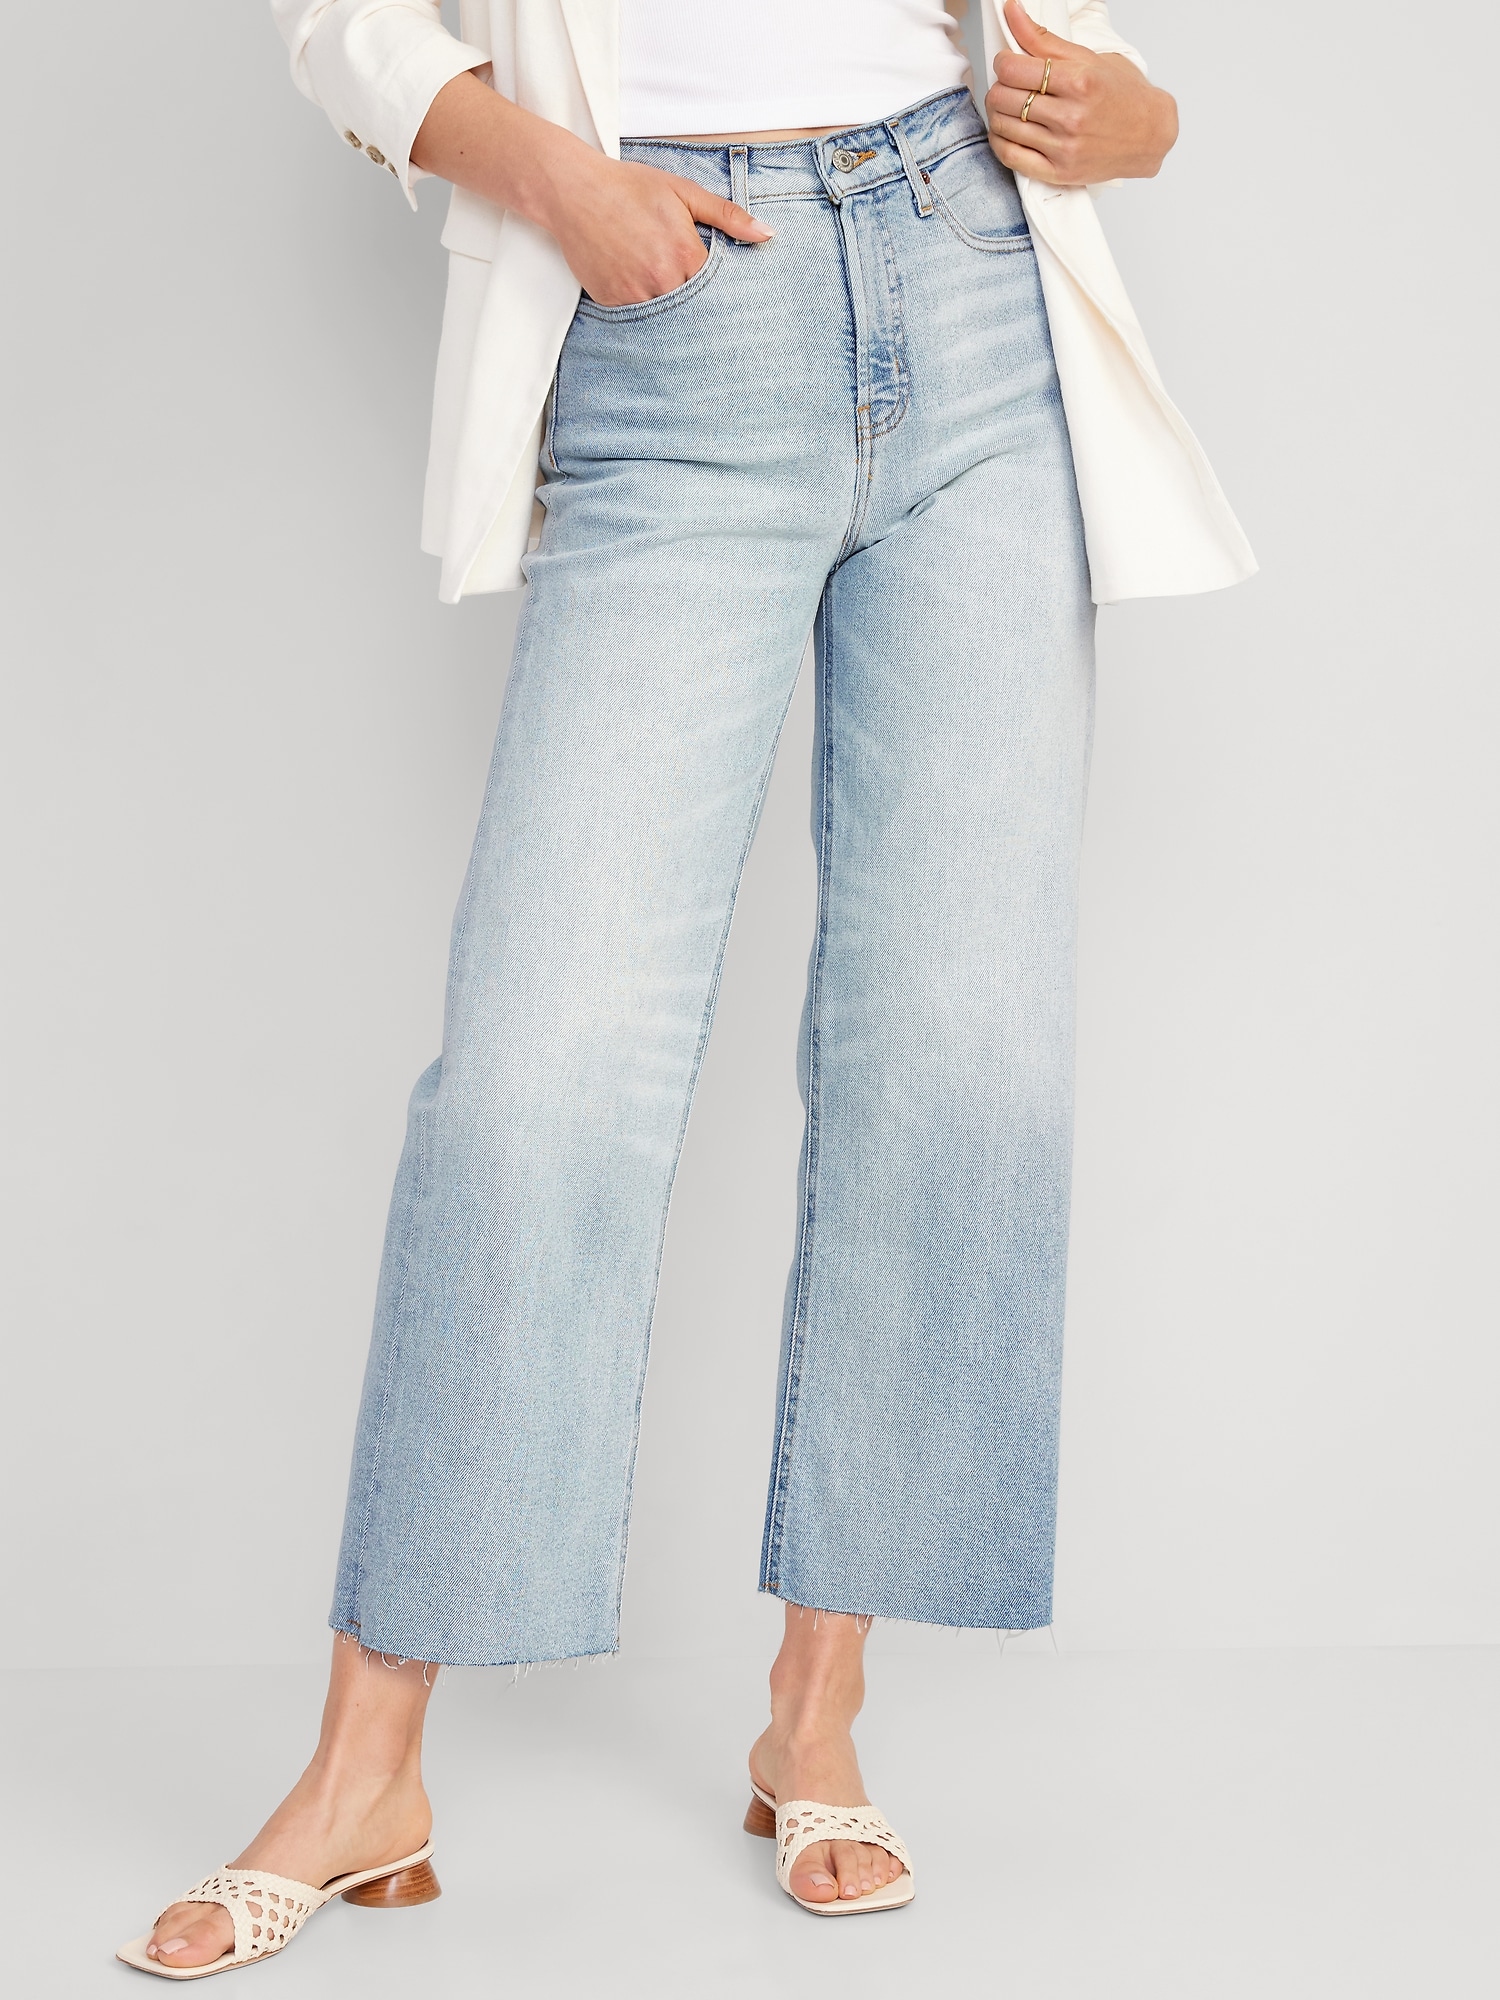 Old Navy Women's High-Waisted Wide-Leg Jeans